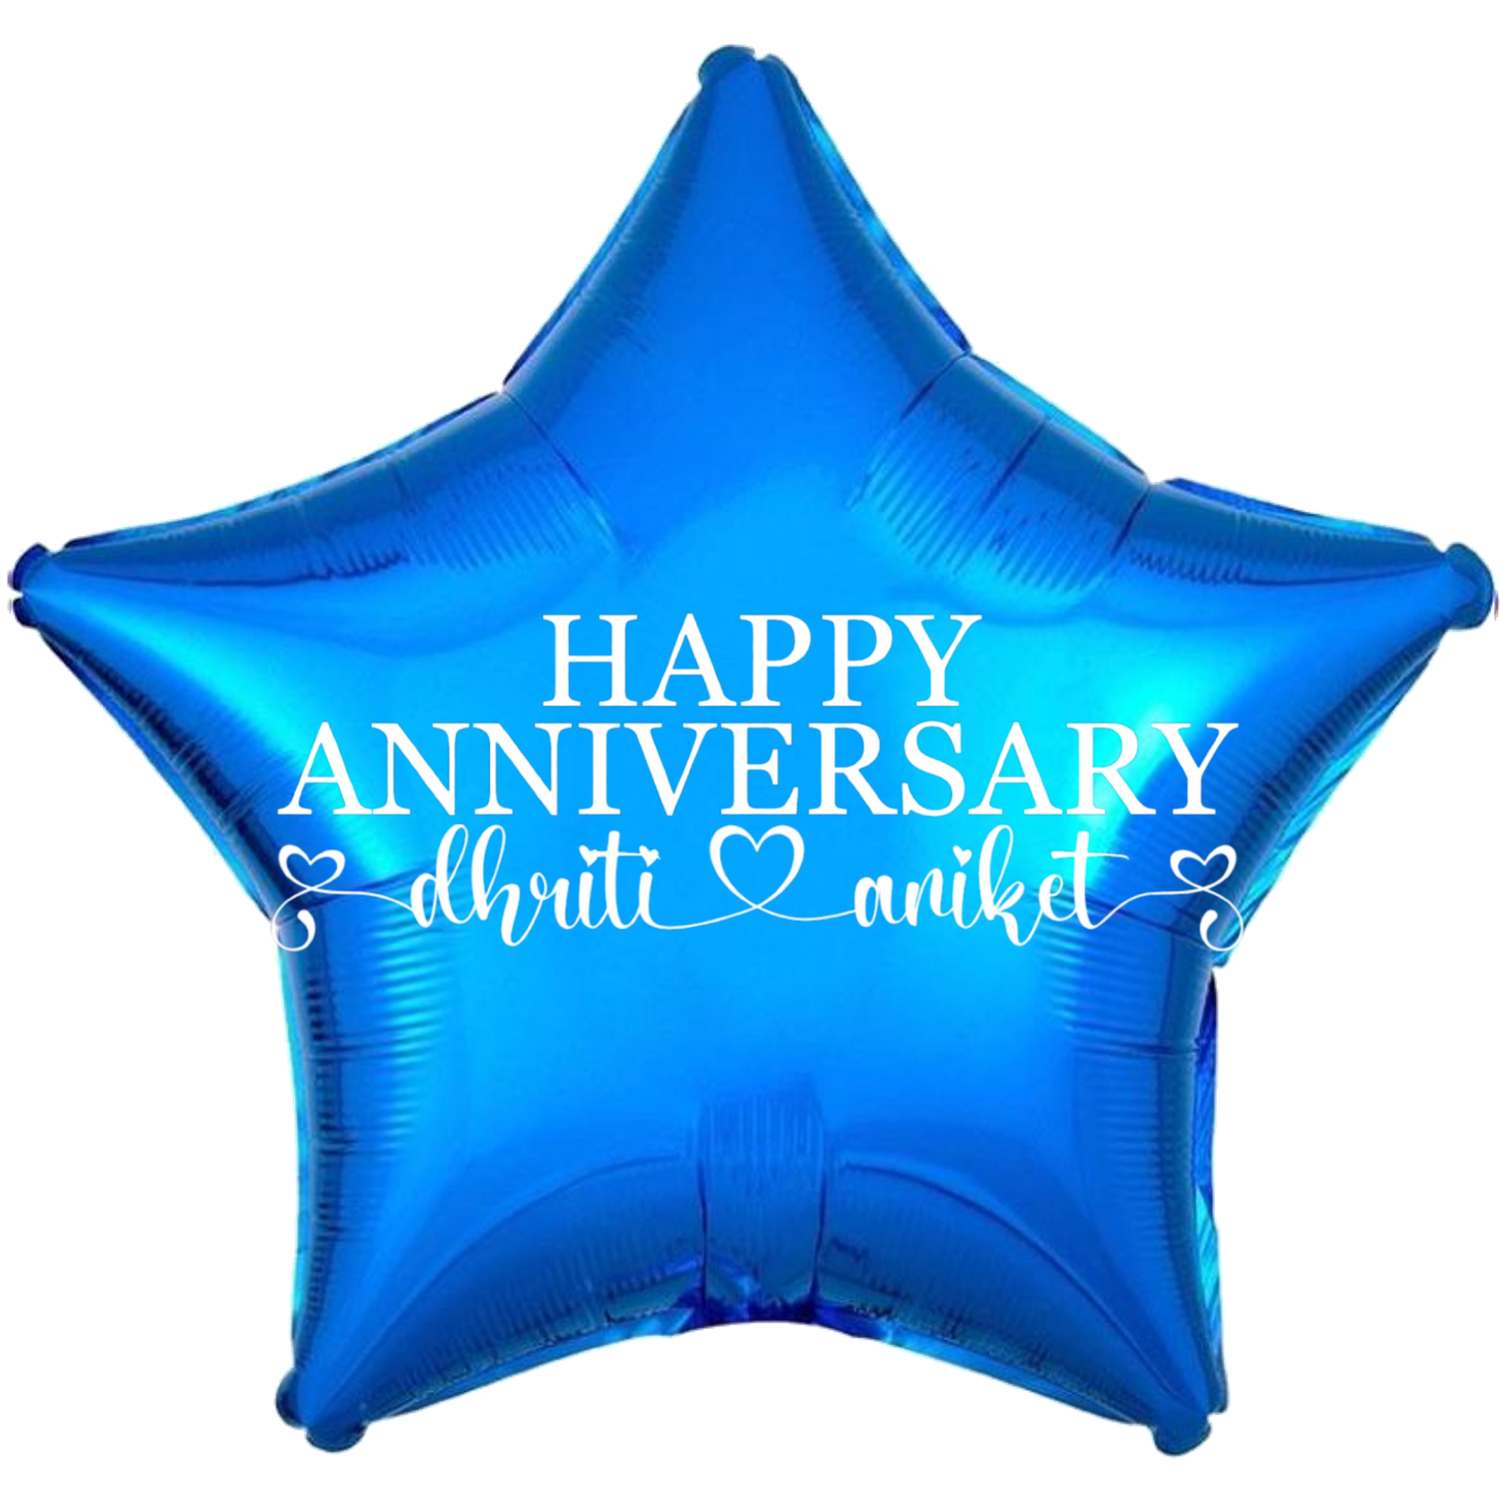 Custom Name/Text/Message Blue Star Balloons For First Wedding Anniversary, 2nd/3rd/5th/10th/15th/20th/25th/30th/35th/40th/45th/50th/55th/60th/65th/75th Marriage Anniversary And Wedding Milestones. Supports Helium/Air, Luxury Bespoke Balloons Make Perfect Decoration Supplies & Surprise For Your Husband/Wife/Partner/Other-Half.